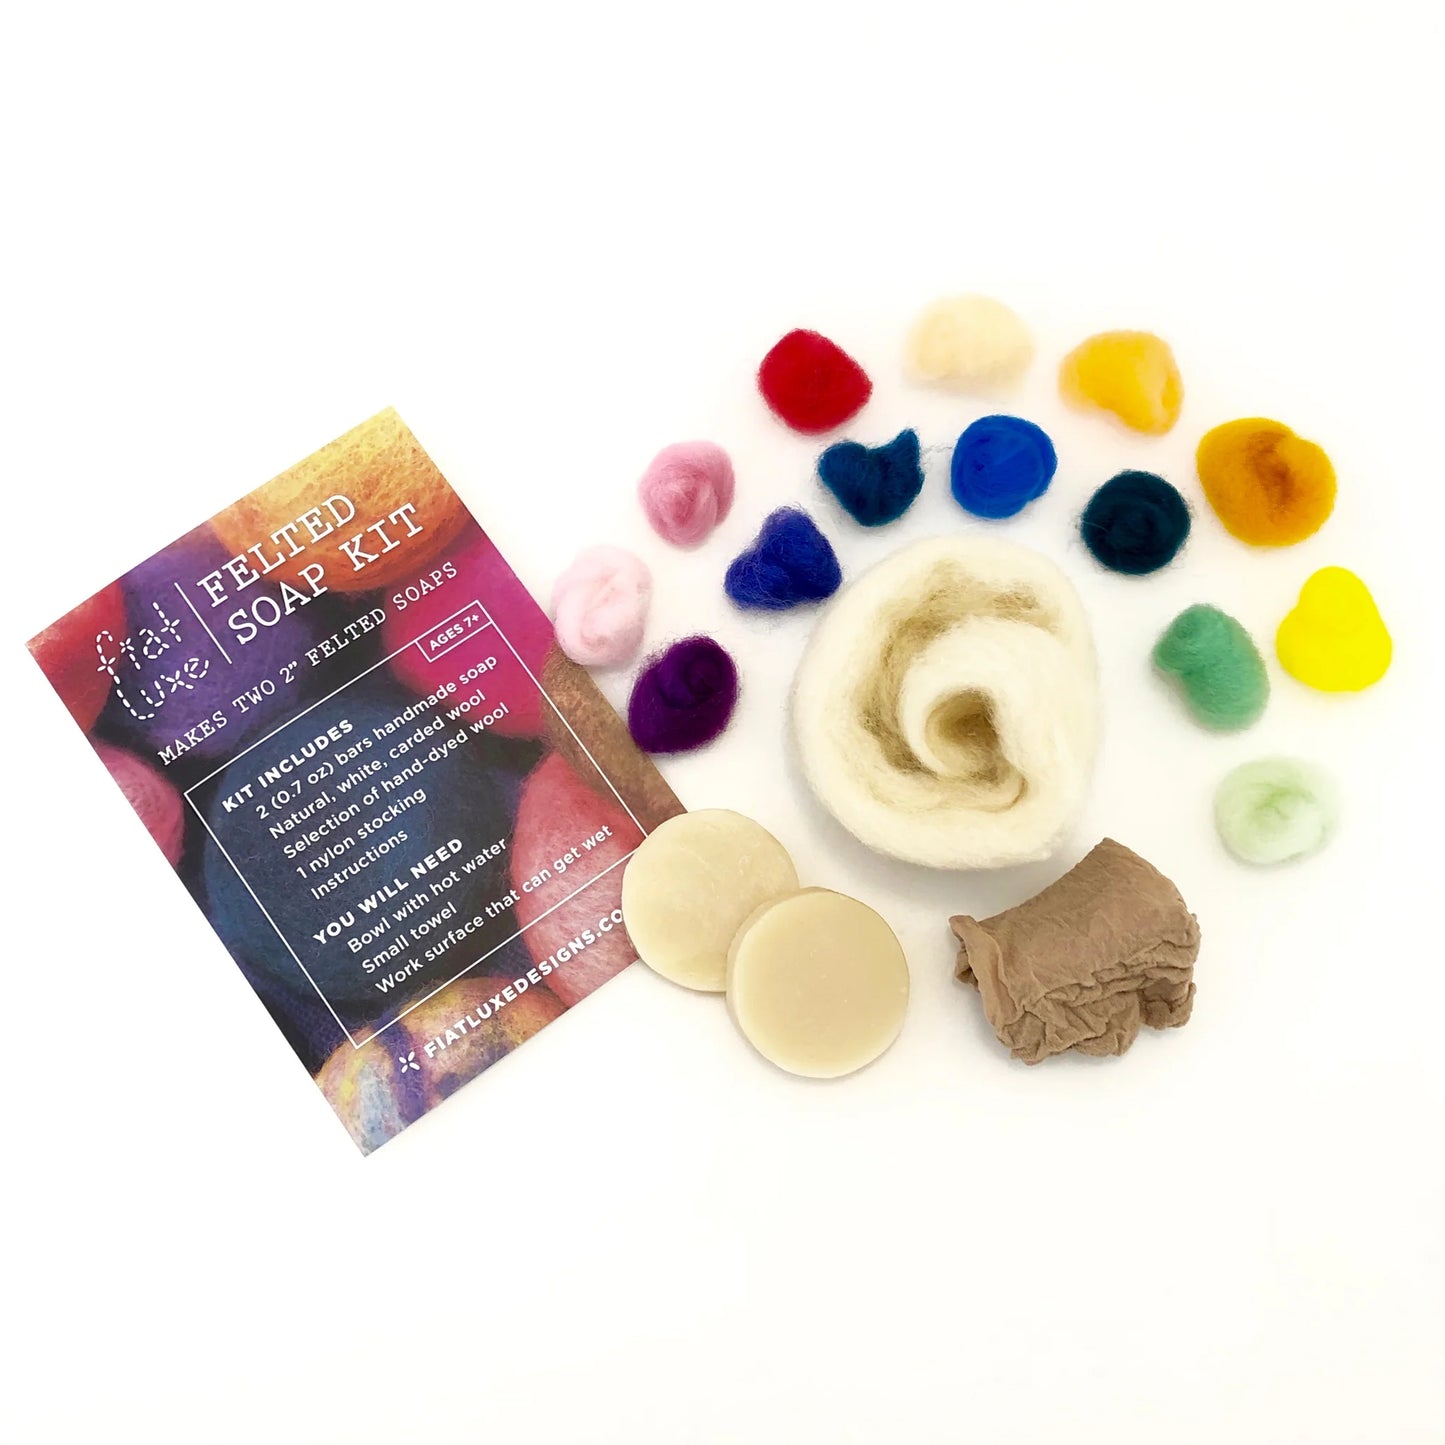 Fiat Luxe Felted Soap Kit